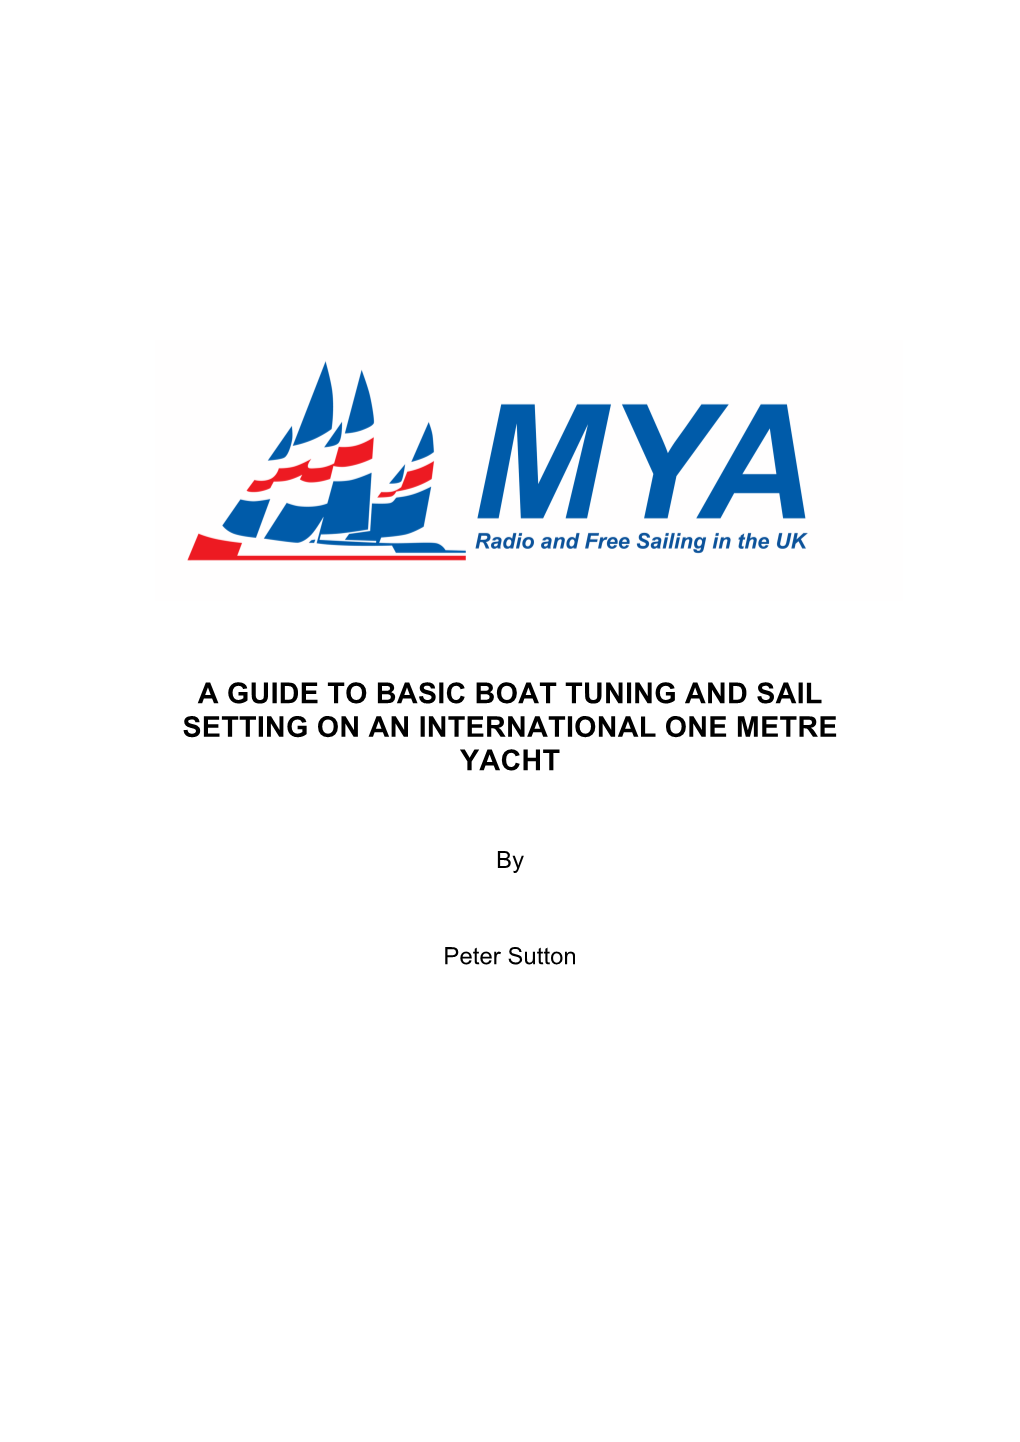 A Guide to Basic Boat Tuning and Sail Setting on an International One Metre Yacht